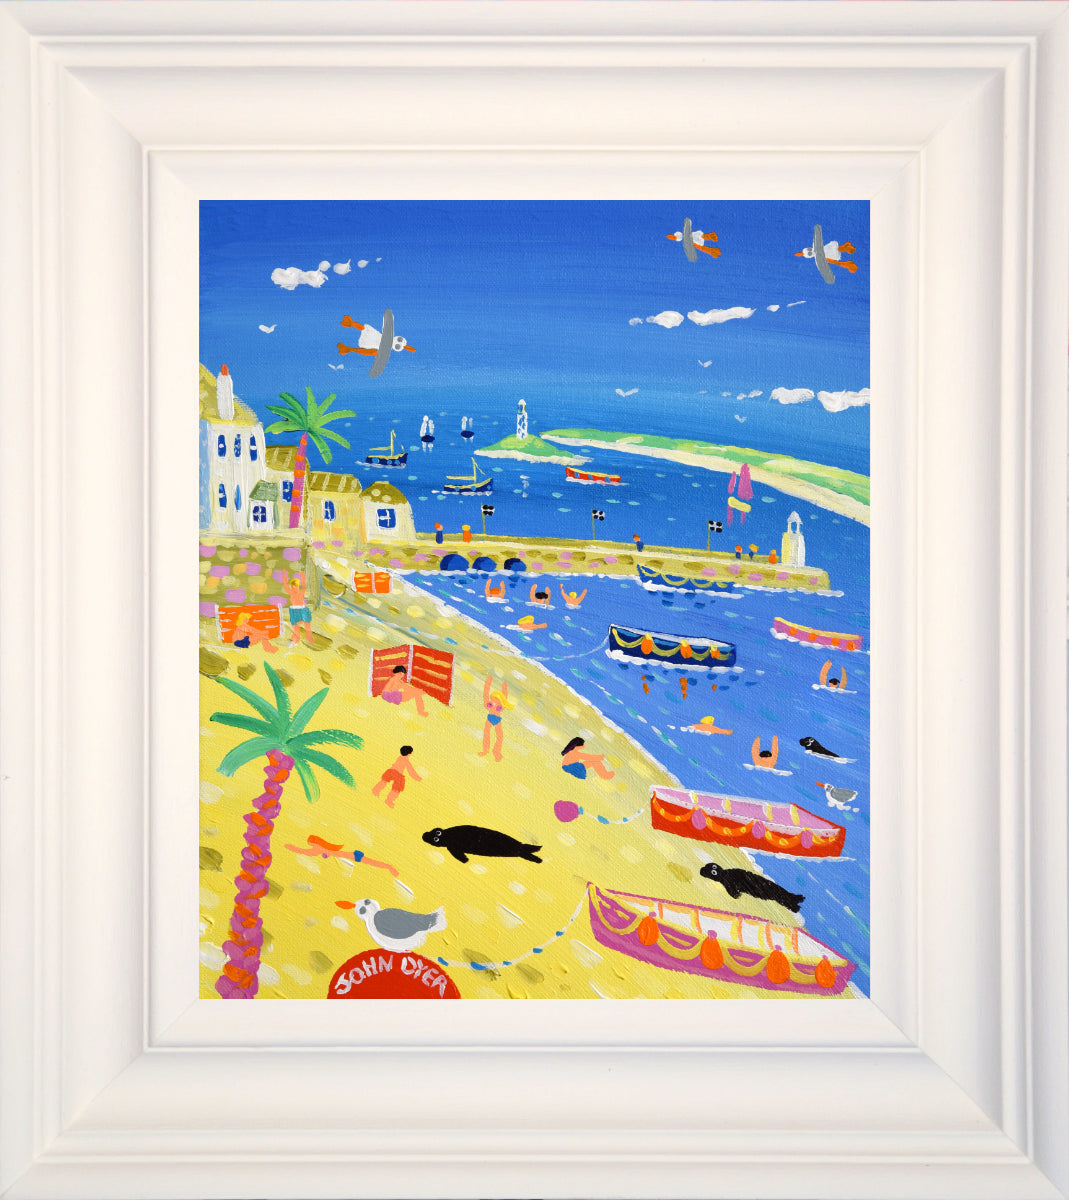 Sea, sun and sand, all captured in this delightful John Dyer painting of St Ives in Cornwall. The artist has combined the view of the harbour with the distant view of Godrevy Lighthouse and Gwithian Sands. Boats are pulled up onto the yellow sand and sleepy seals bask in the warm summer sunshine. Beautiful.